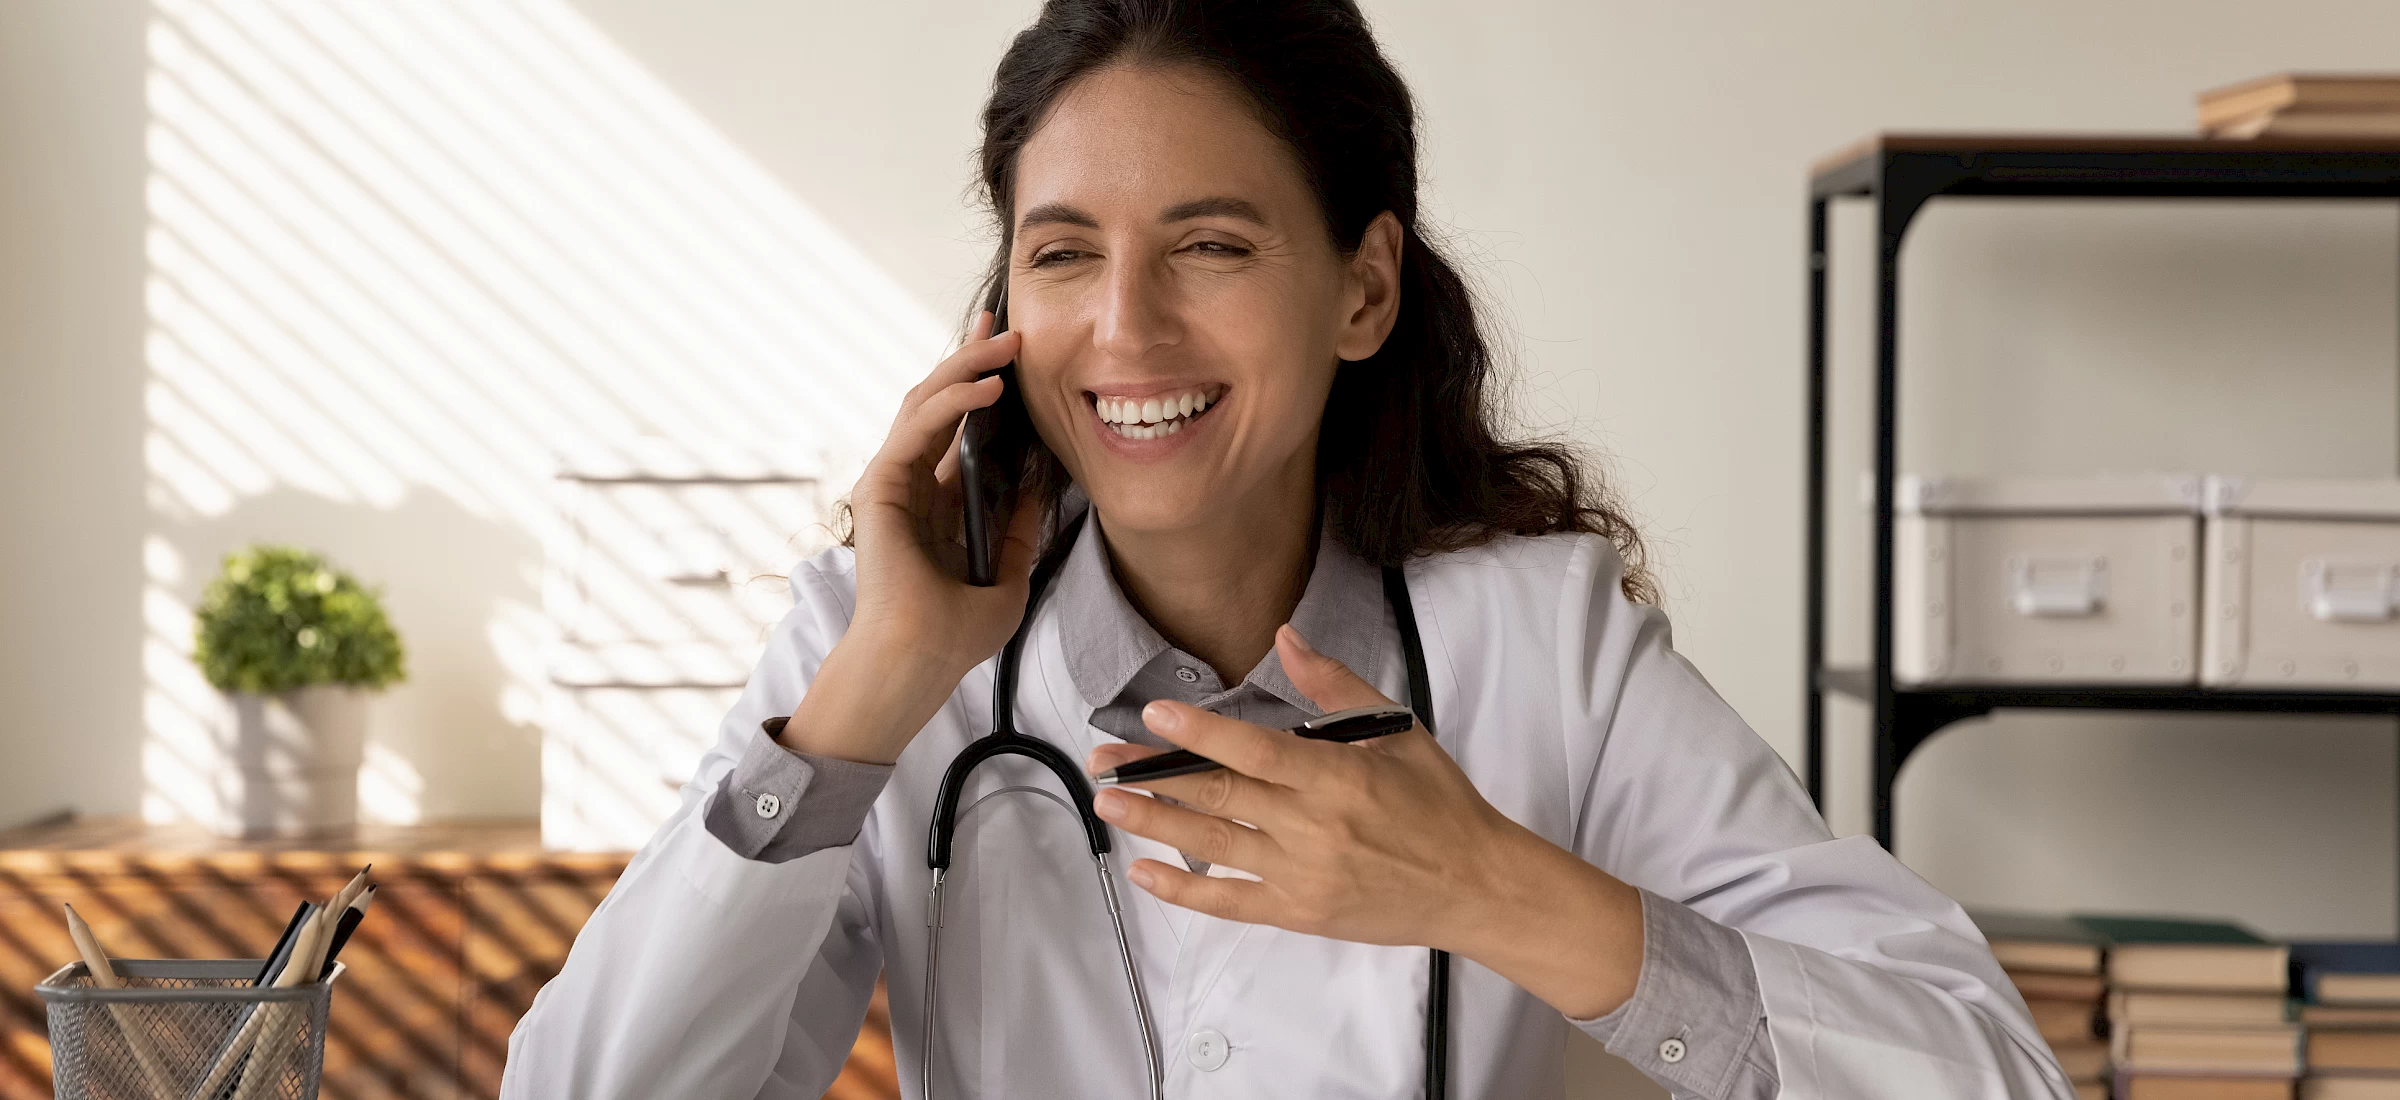 A doctor on the phone in her office